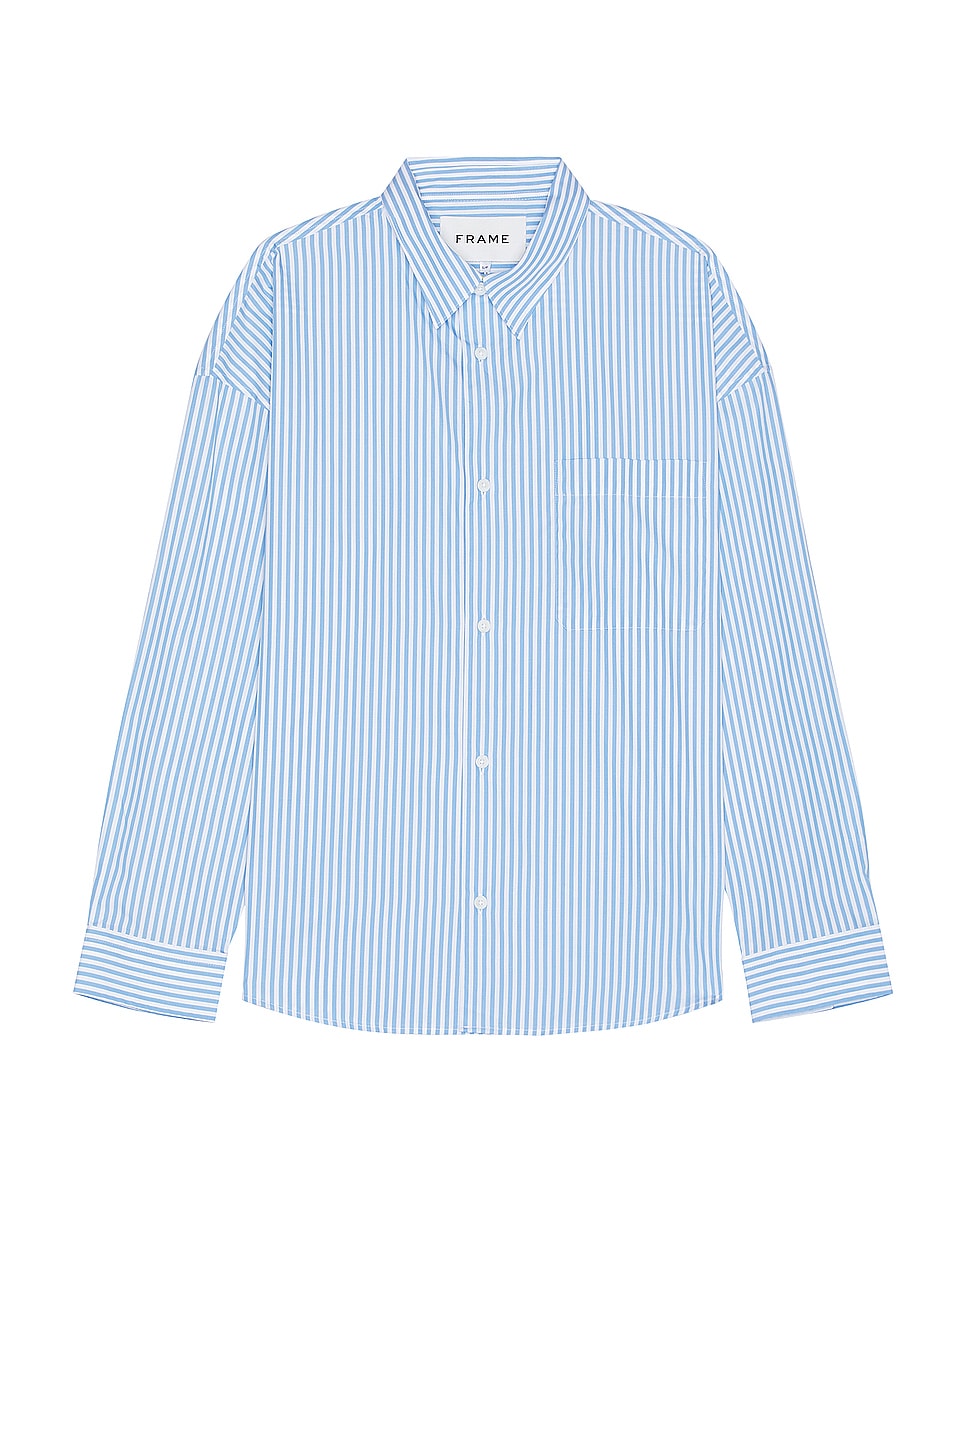 Image 1 of FRAME Relaxed Cotton Shirt in Blue Stripe